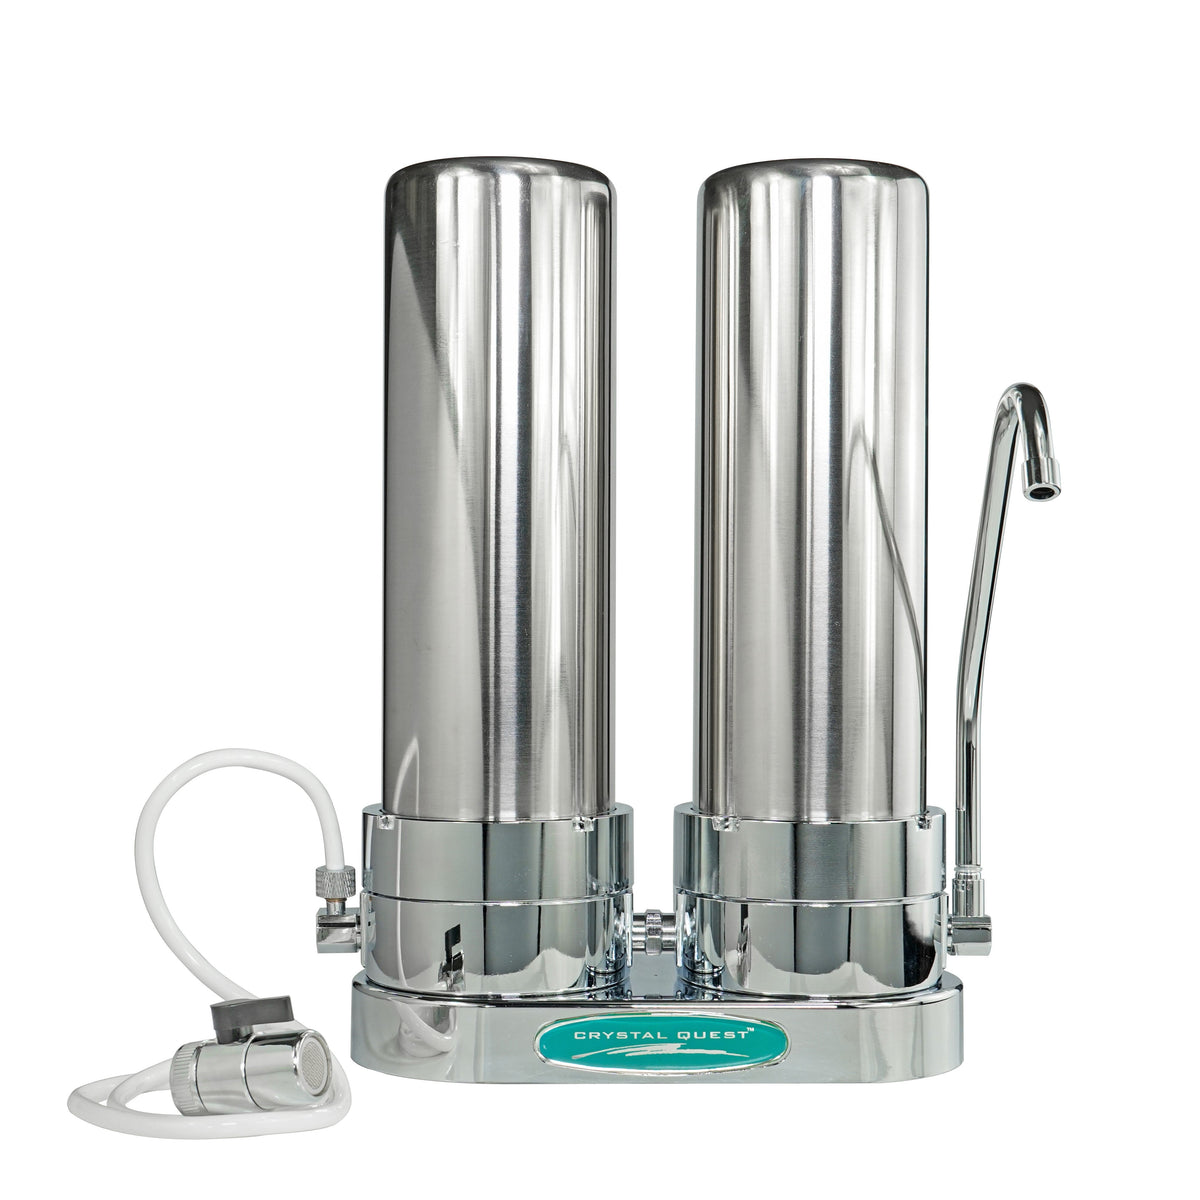 Double / Stainless Steel Ceramic Countertop Water Filter System - Countertop Water Filters - Crystal Quest